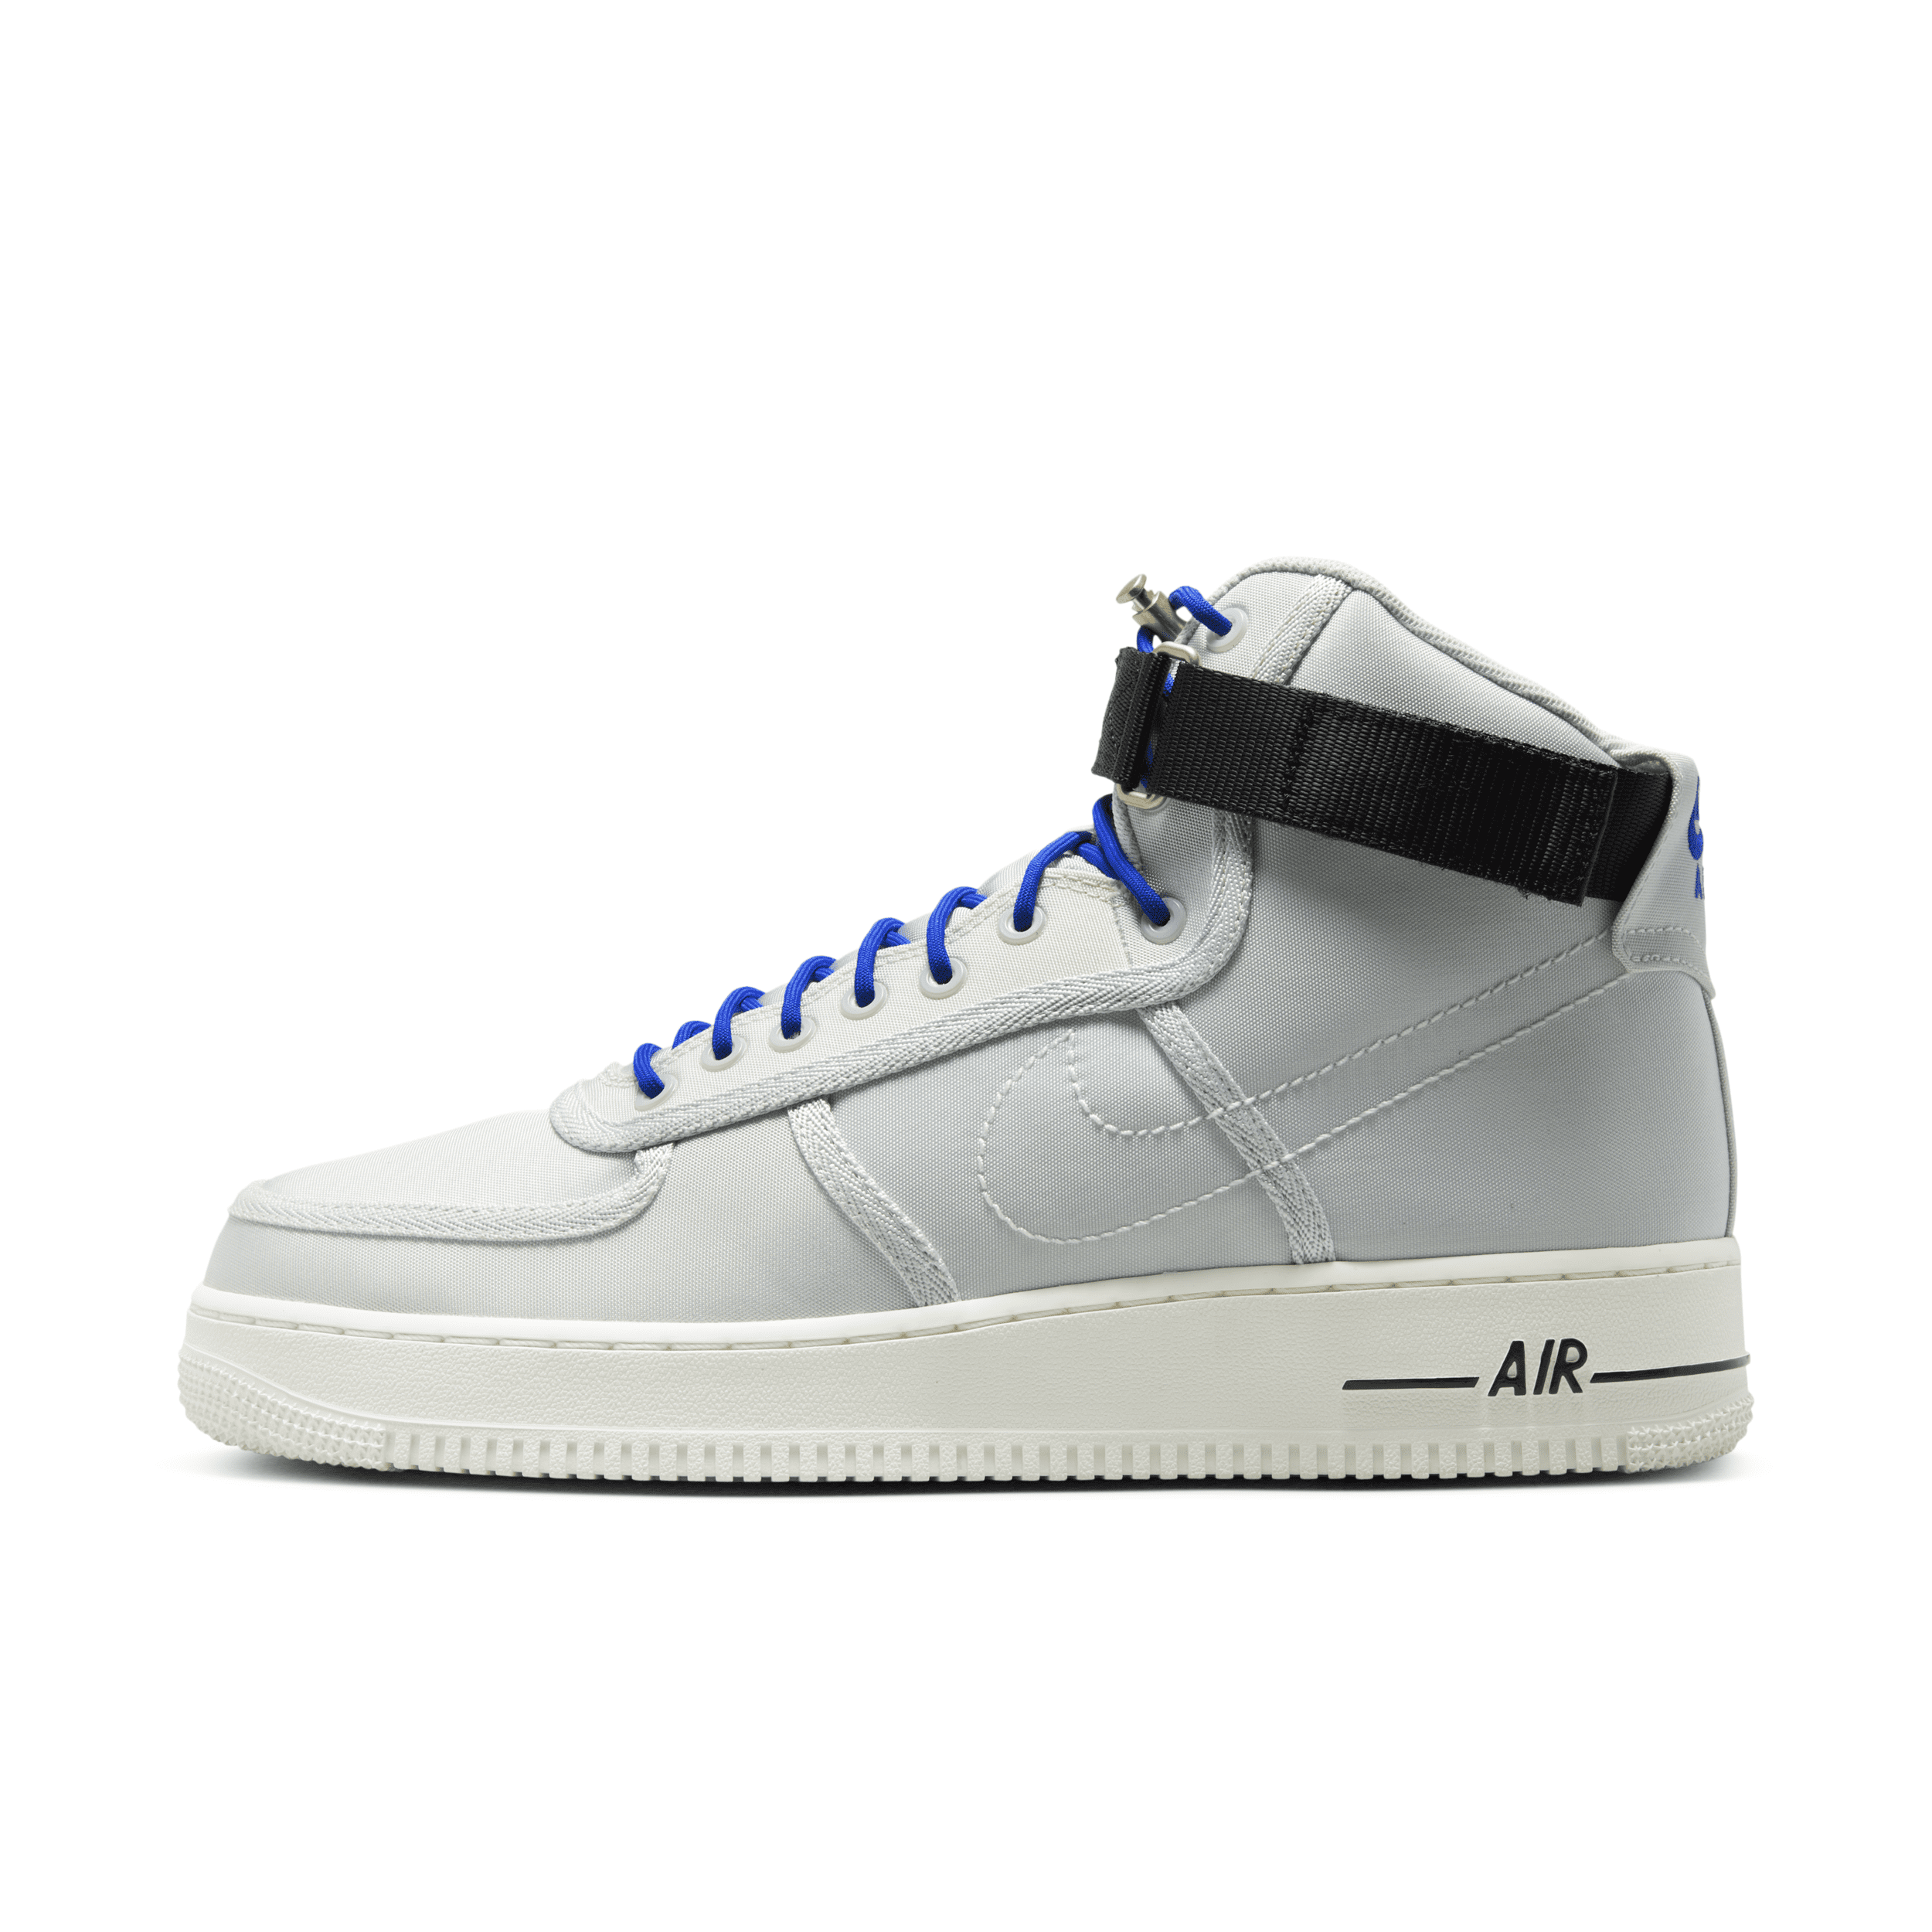 NIKE MEN'S AIR FORCE 1 HIGH '07 LV8 SHOES,1000460275